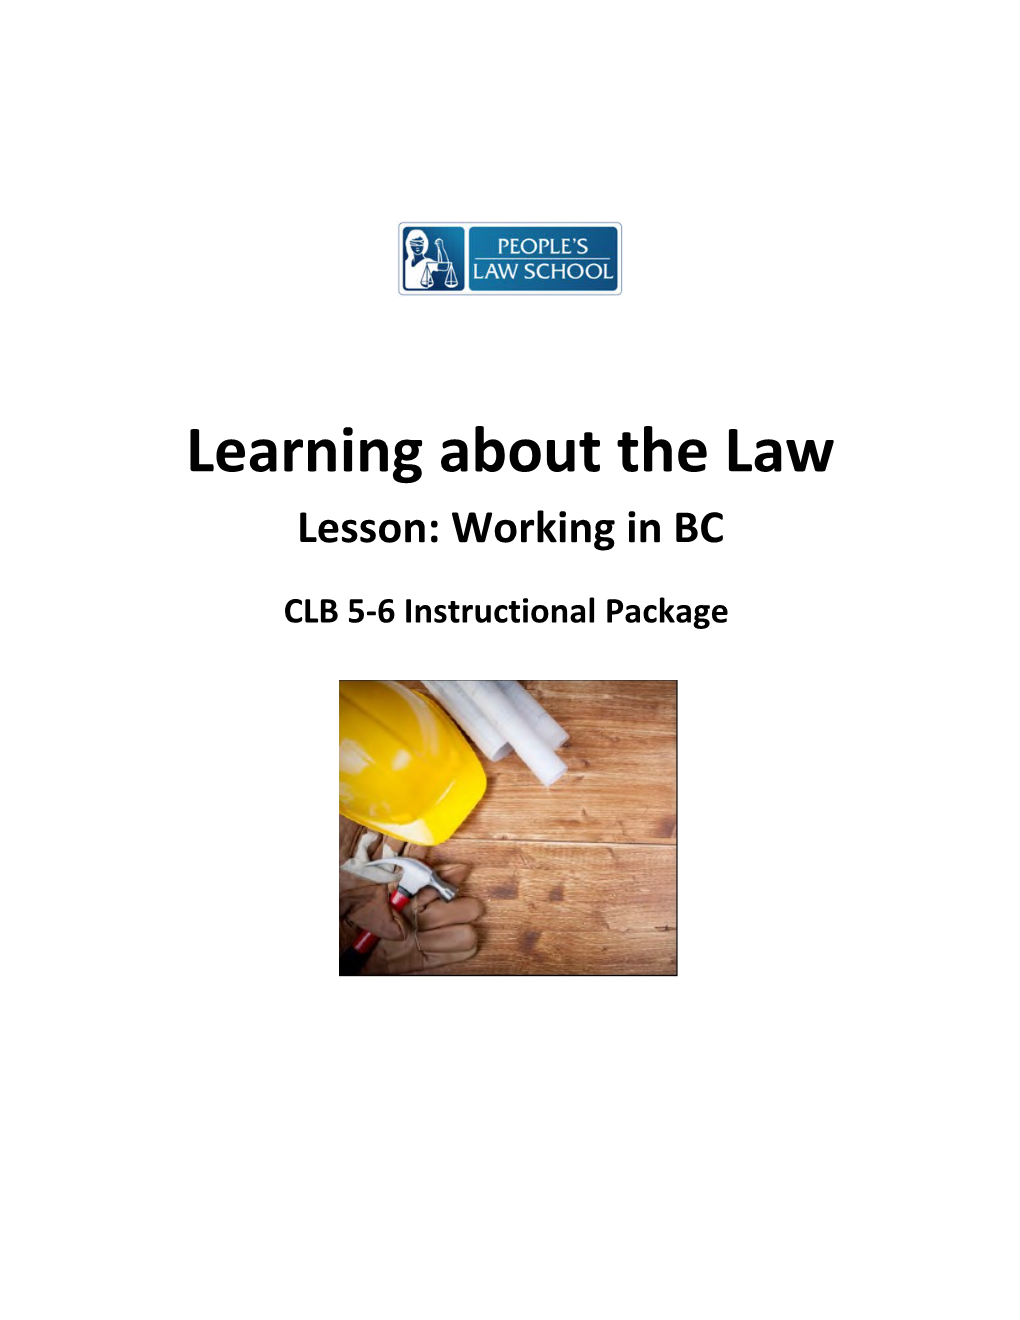 Learning About the Law Lesson: Working in BC